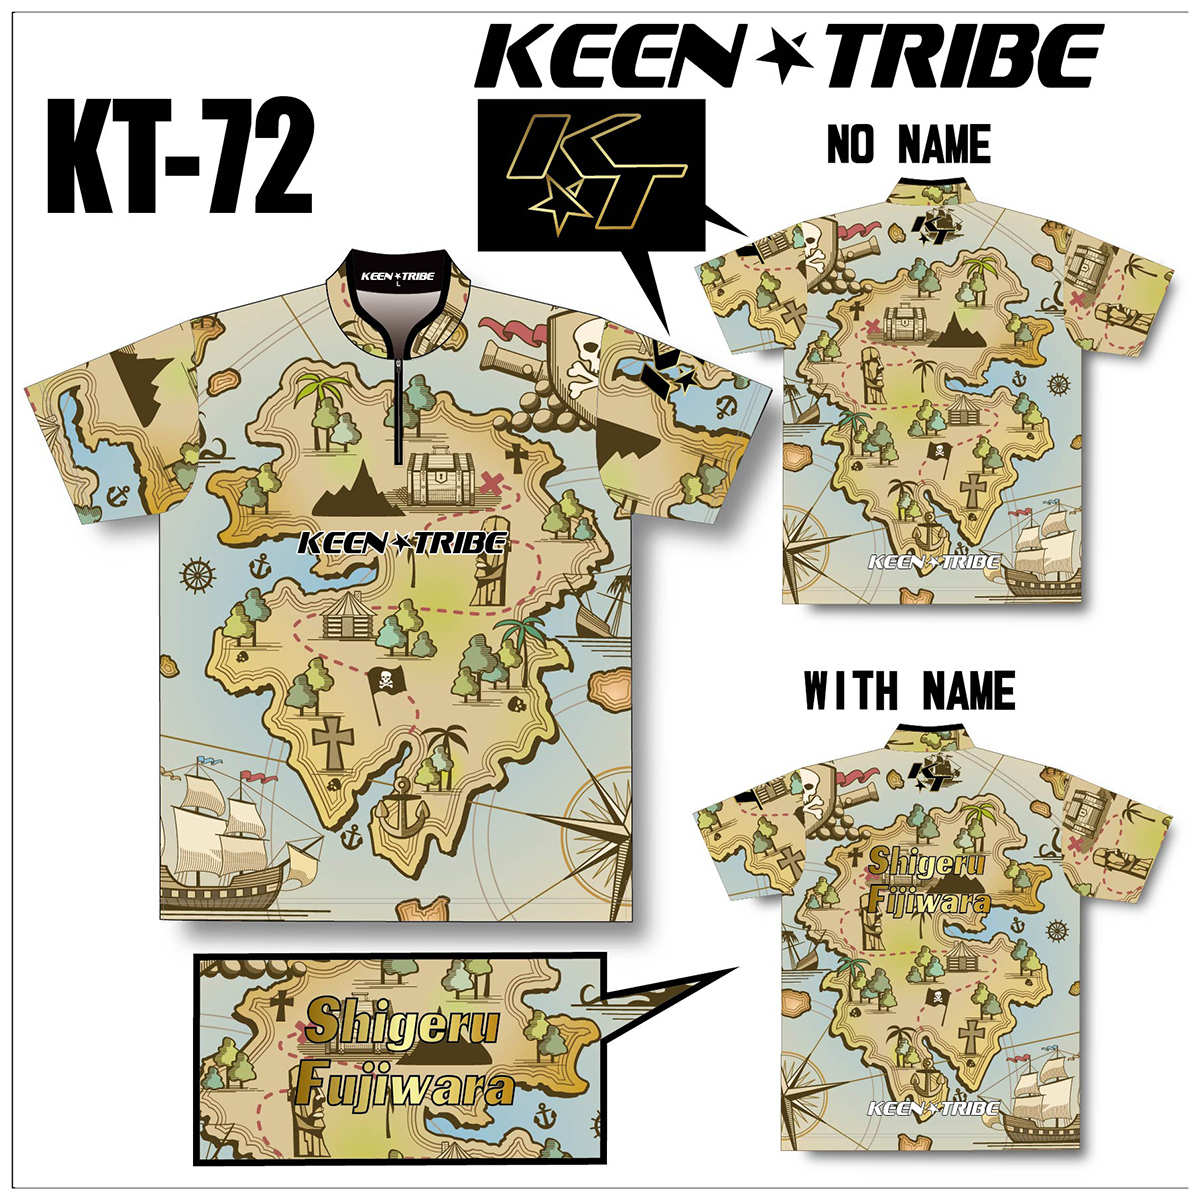 KEEN ★ TRIBE　KT-72(受注生産)